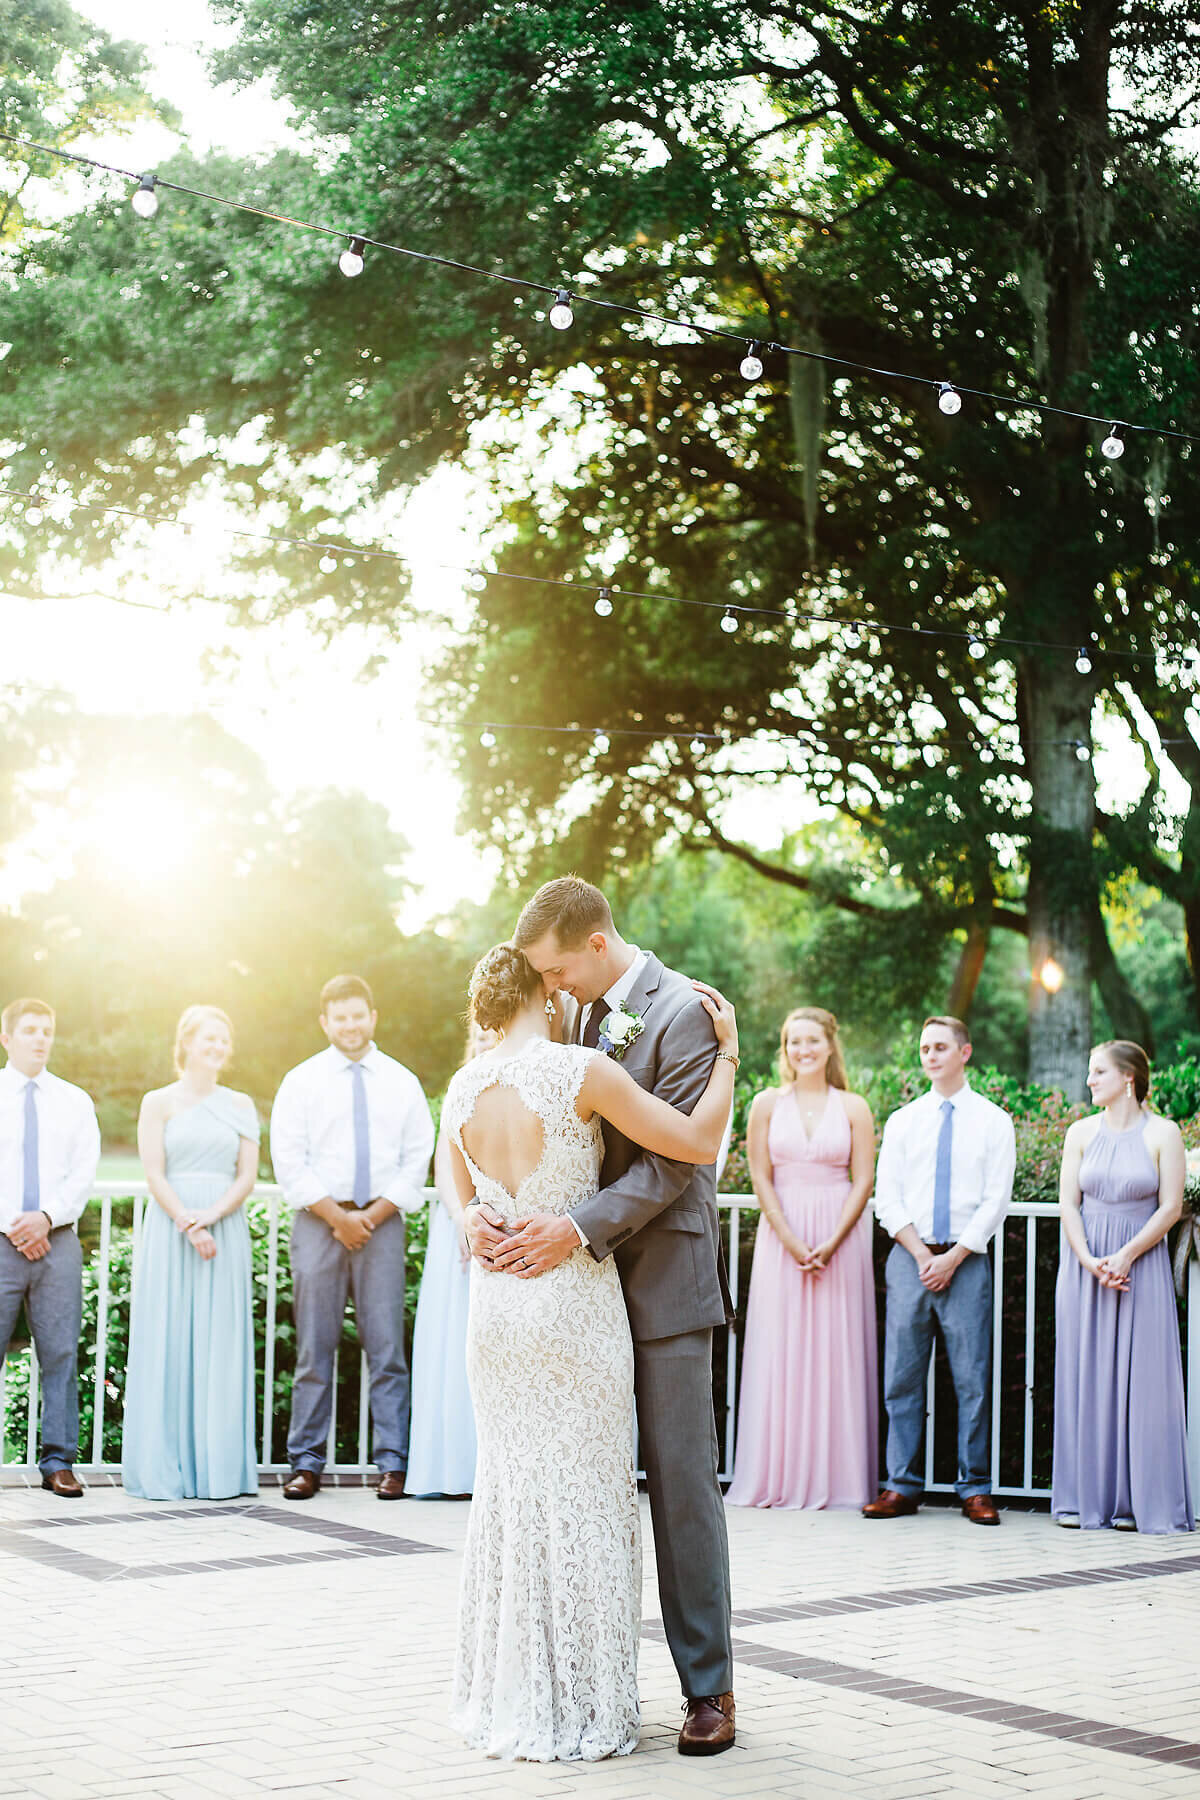 Izzy + Co. Athens and Savannah wedding and lifestyle photographer